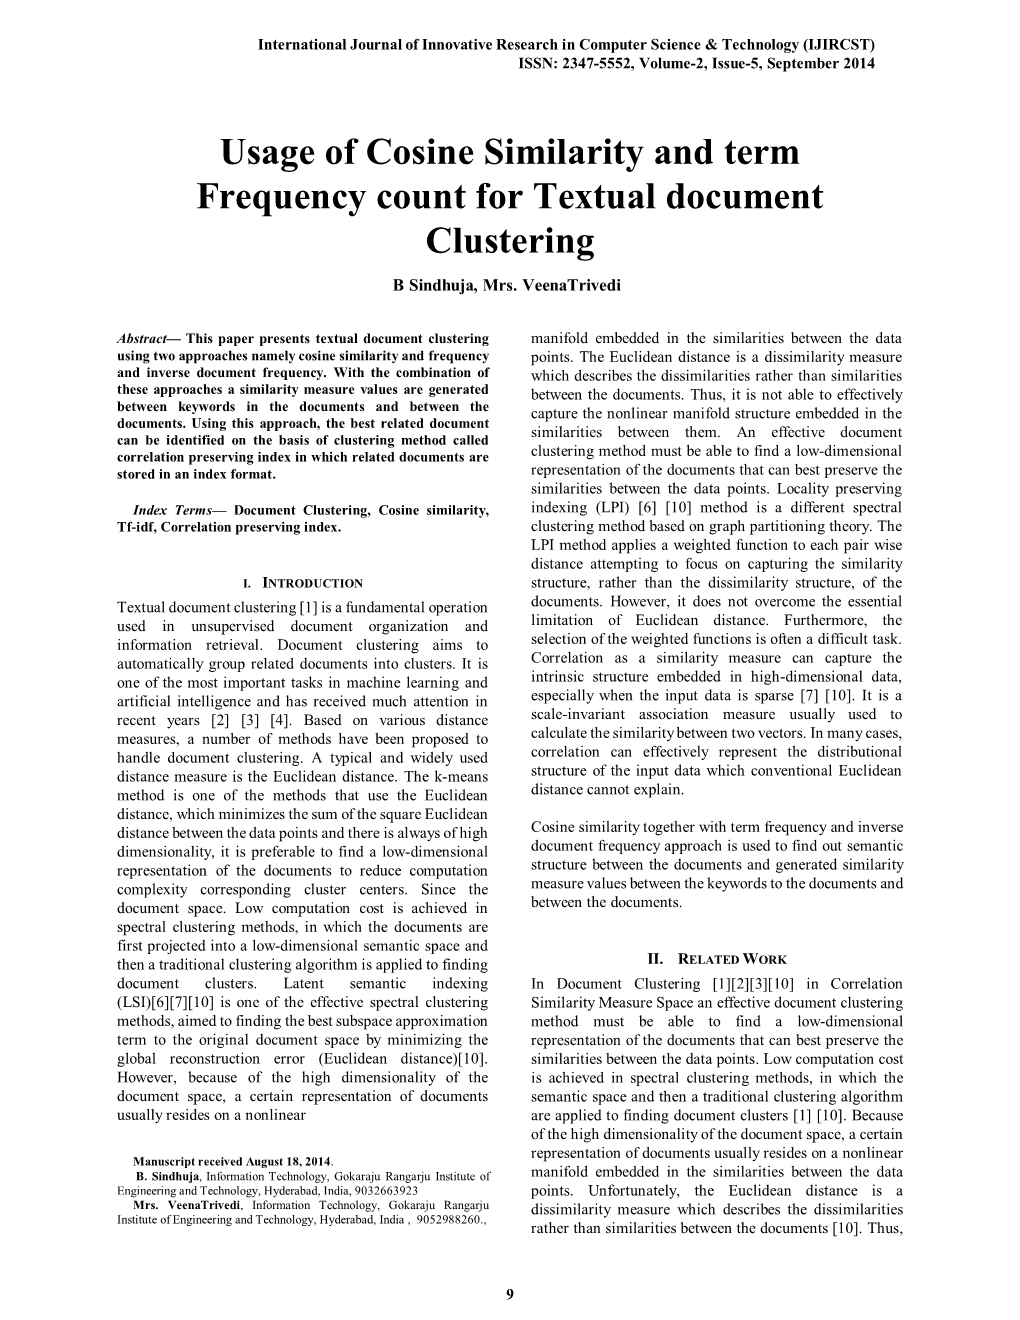 Usage of Cosine Similarity and Term Frequency Count for Textual Document Clustering B Sindhuja, Mrs